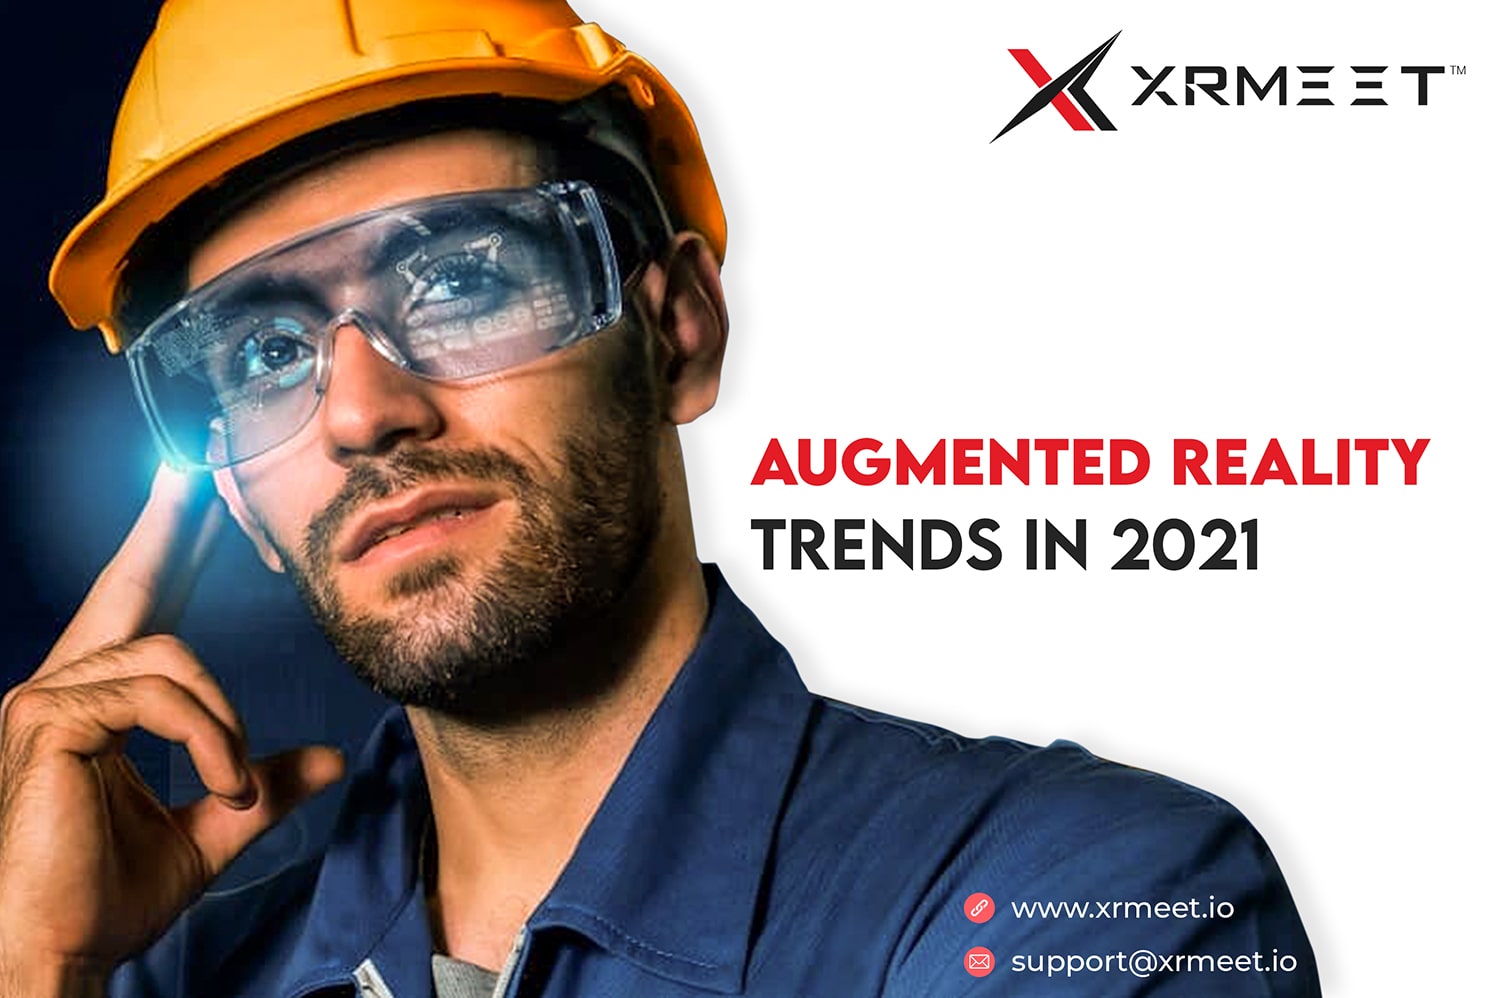 Augmented reality trends in 2021